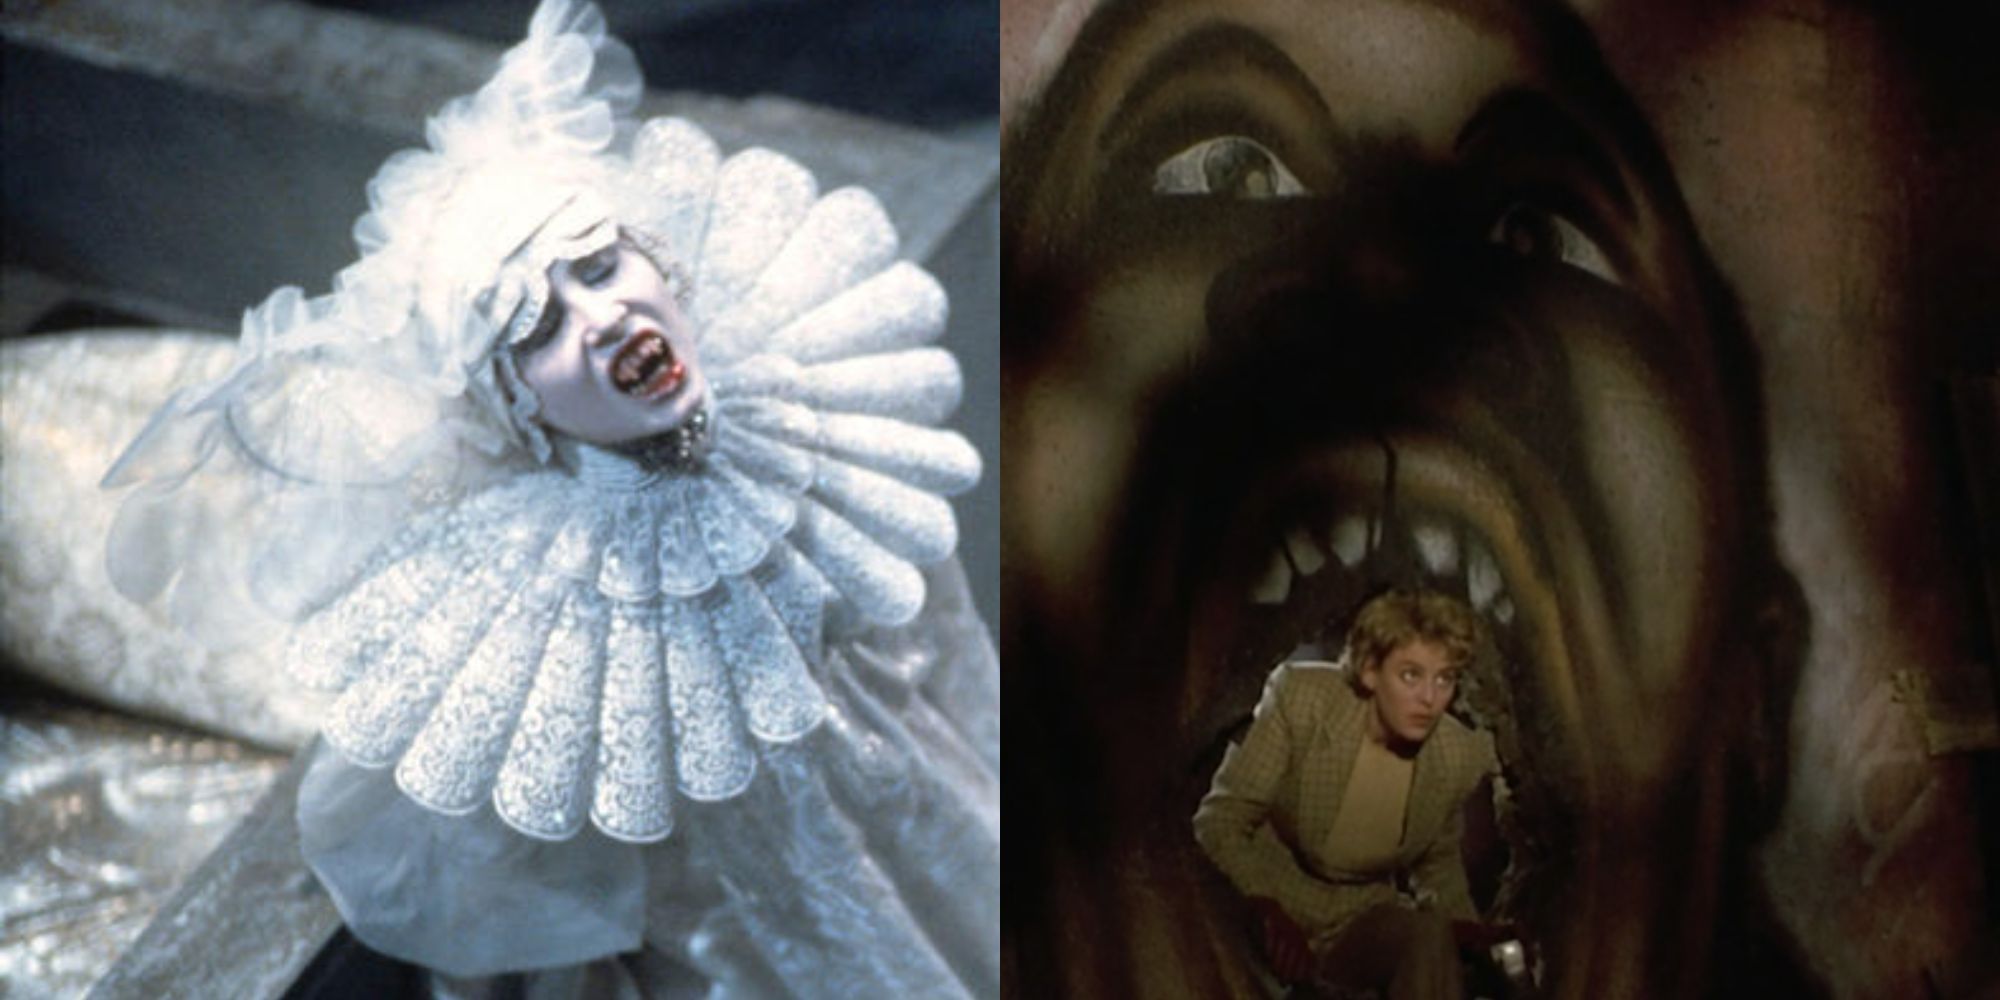 A still of Lucy from Bram Stoker's Dracula on the left and a still of Helen coming out from a hole resembling the mouth of Candyman in Candyman on the right